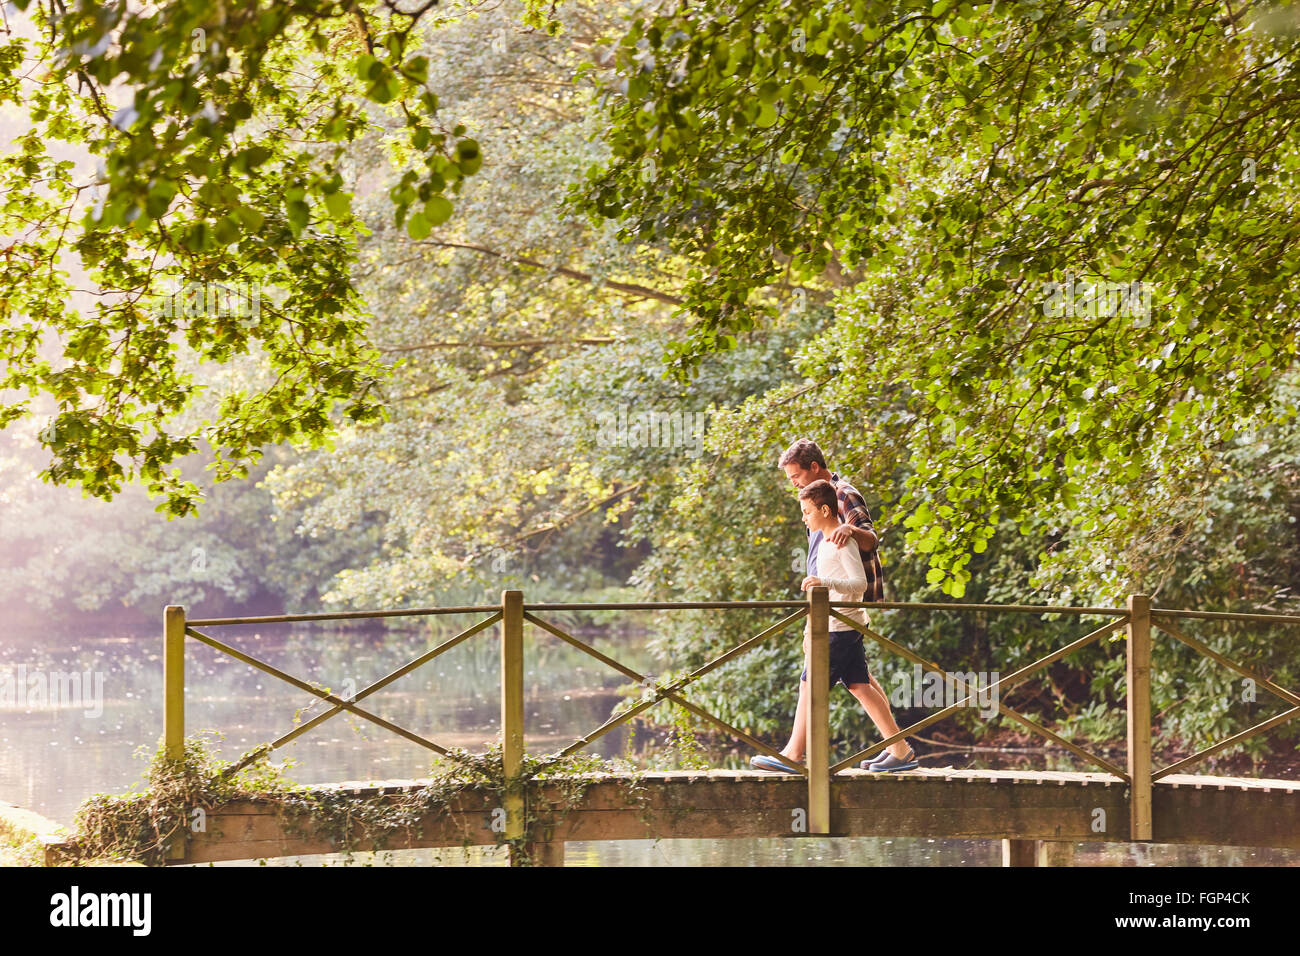 Father and son crossing footbridge in park with trees Stock Photo